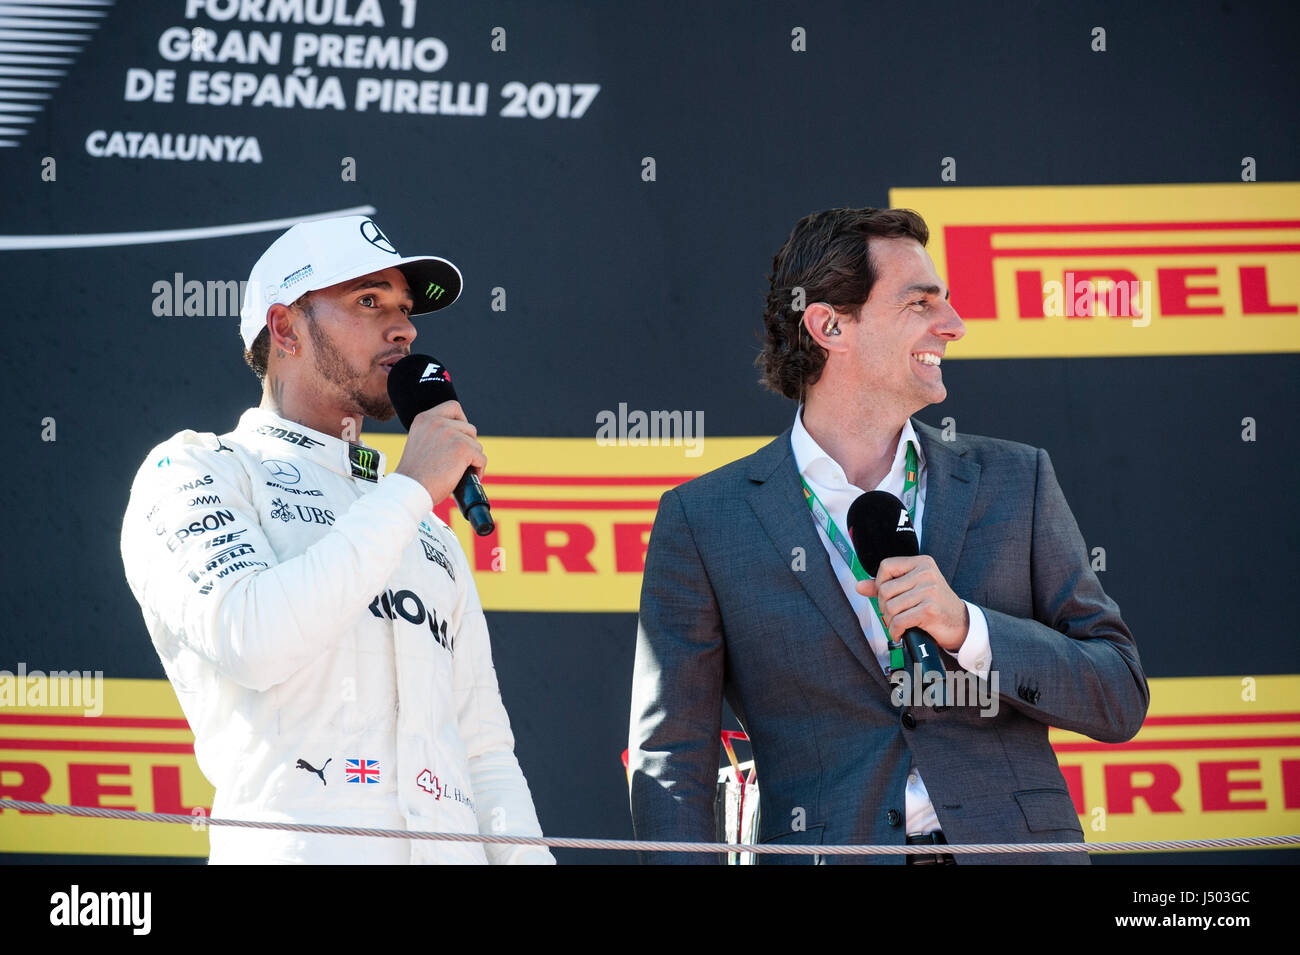 Barcelona, Spain. 14 May, 2017. Left, Lewis Hamilton, driver of the Mercedes AMG F1 Team and rigth, the ex-Formula 1 driver Pedro de la Rosa (ESP) at the podium,   during the Sunday race day, Formula One Spanish Grand Prix at the Circuit of Catalunya. Credit: Pablo Guillen/Alamy Live News Stock Photo